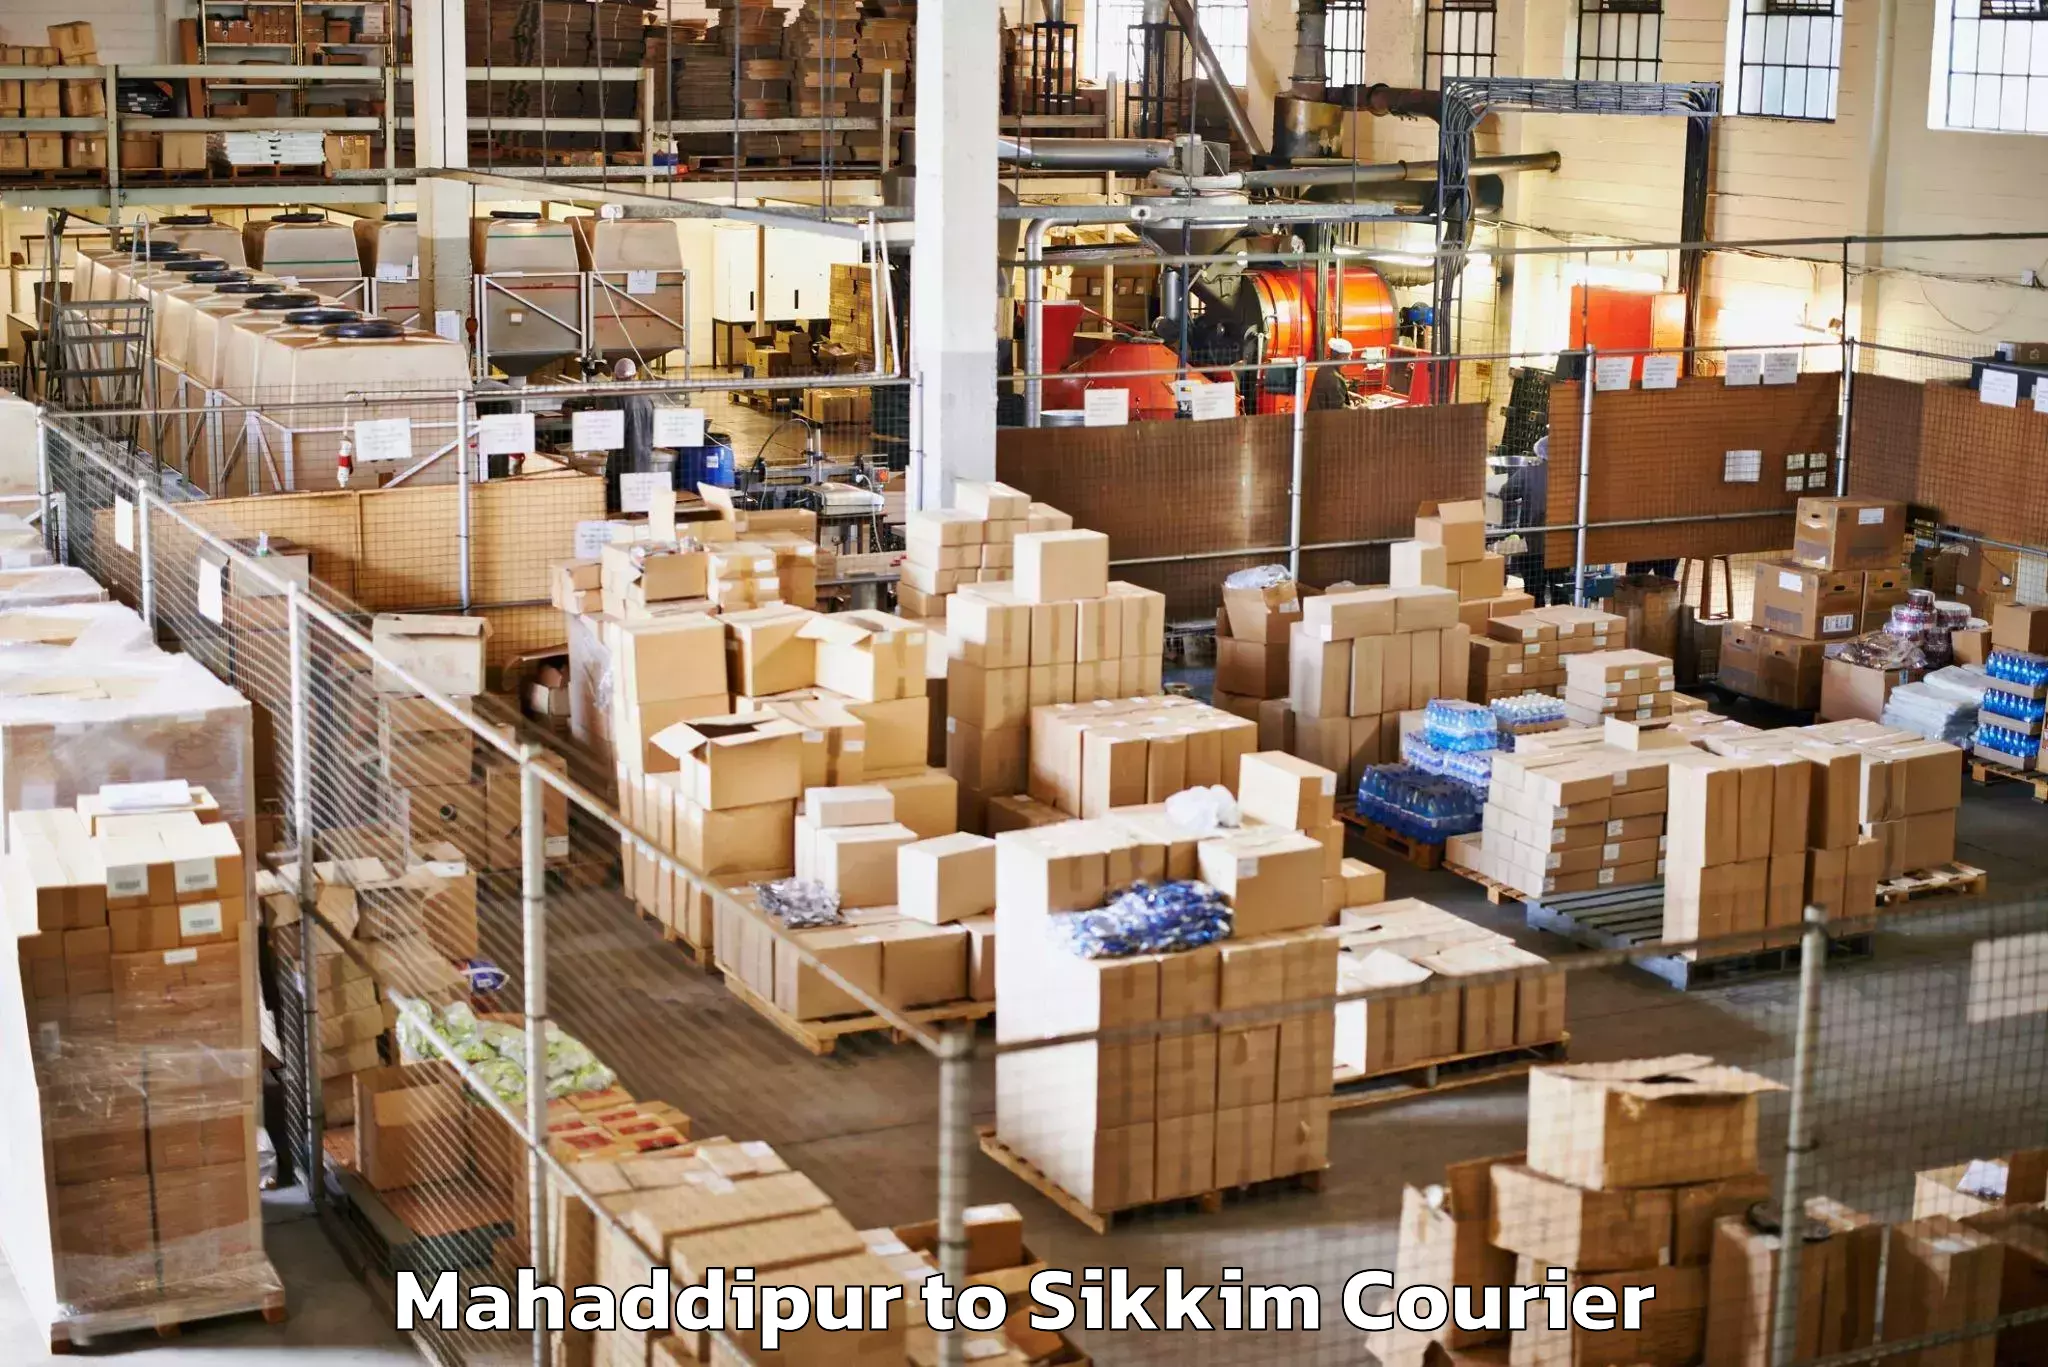 Baggage delivery technology in Mahaddipur to East Sikkim